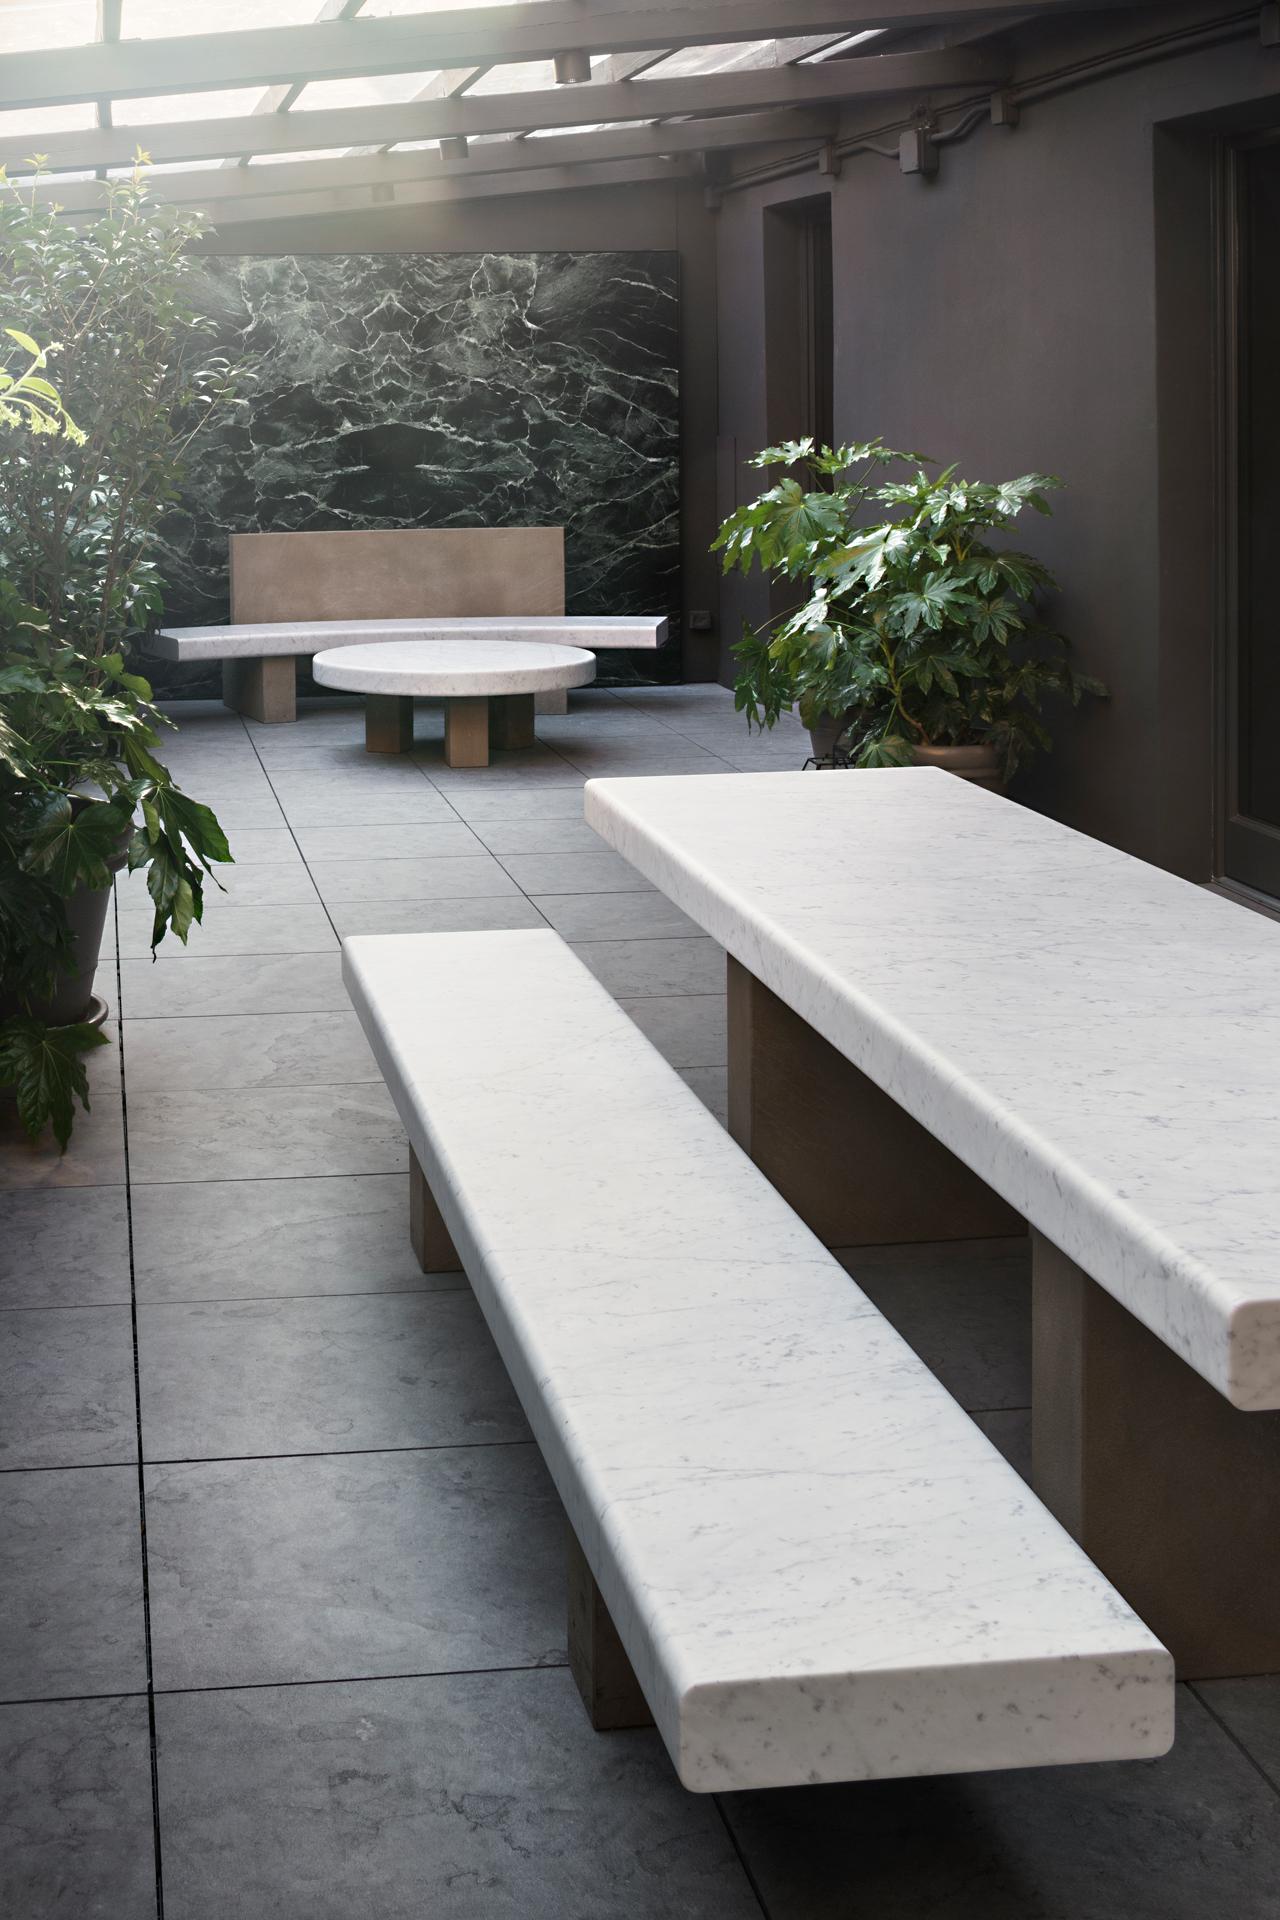 Italian Salvatori Span Outdoor Table and Bench in Bianco Carrara & Avana by John Pawson For Sale